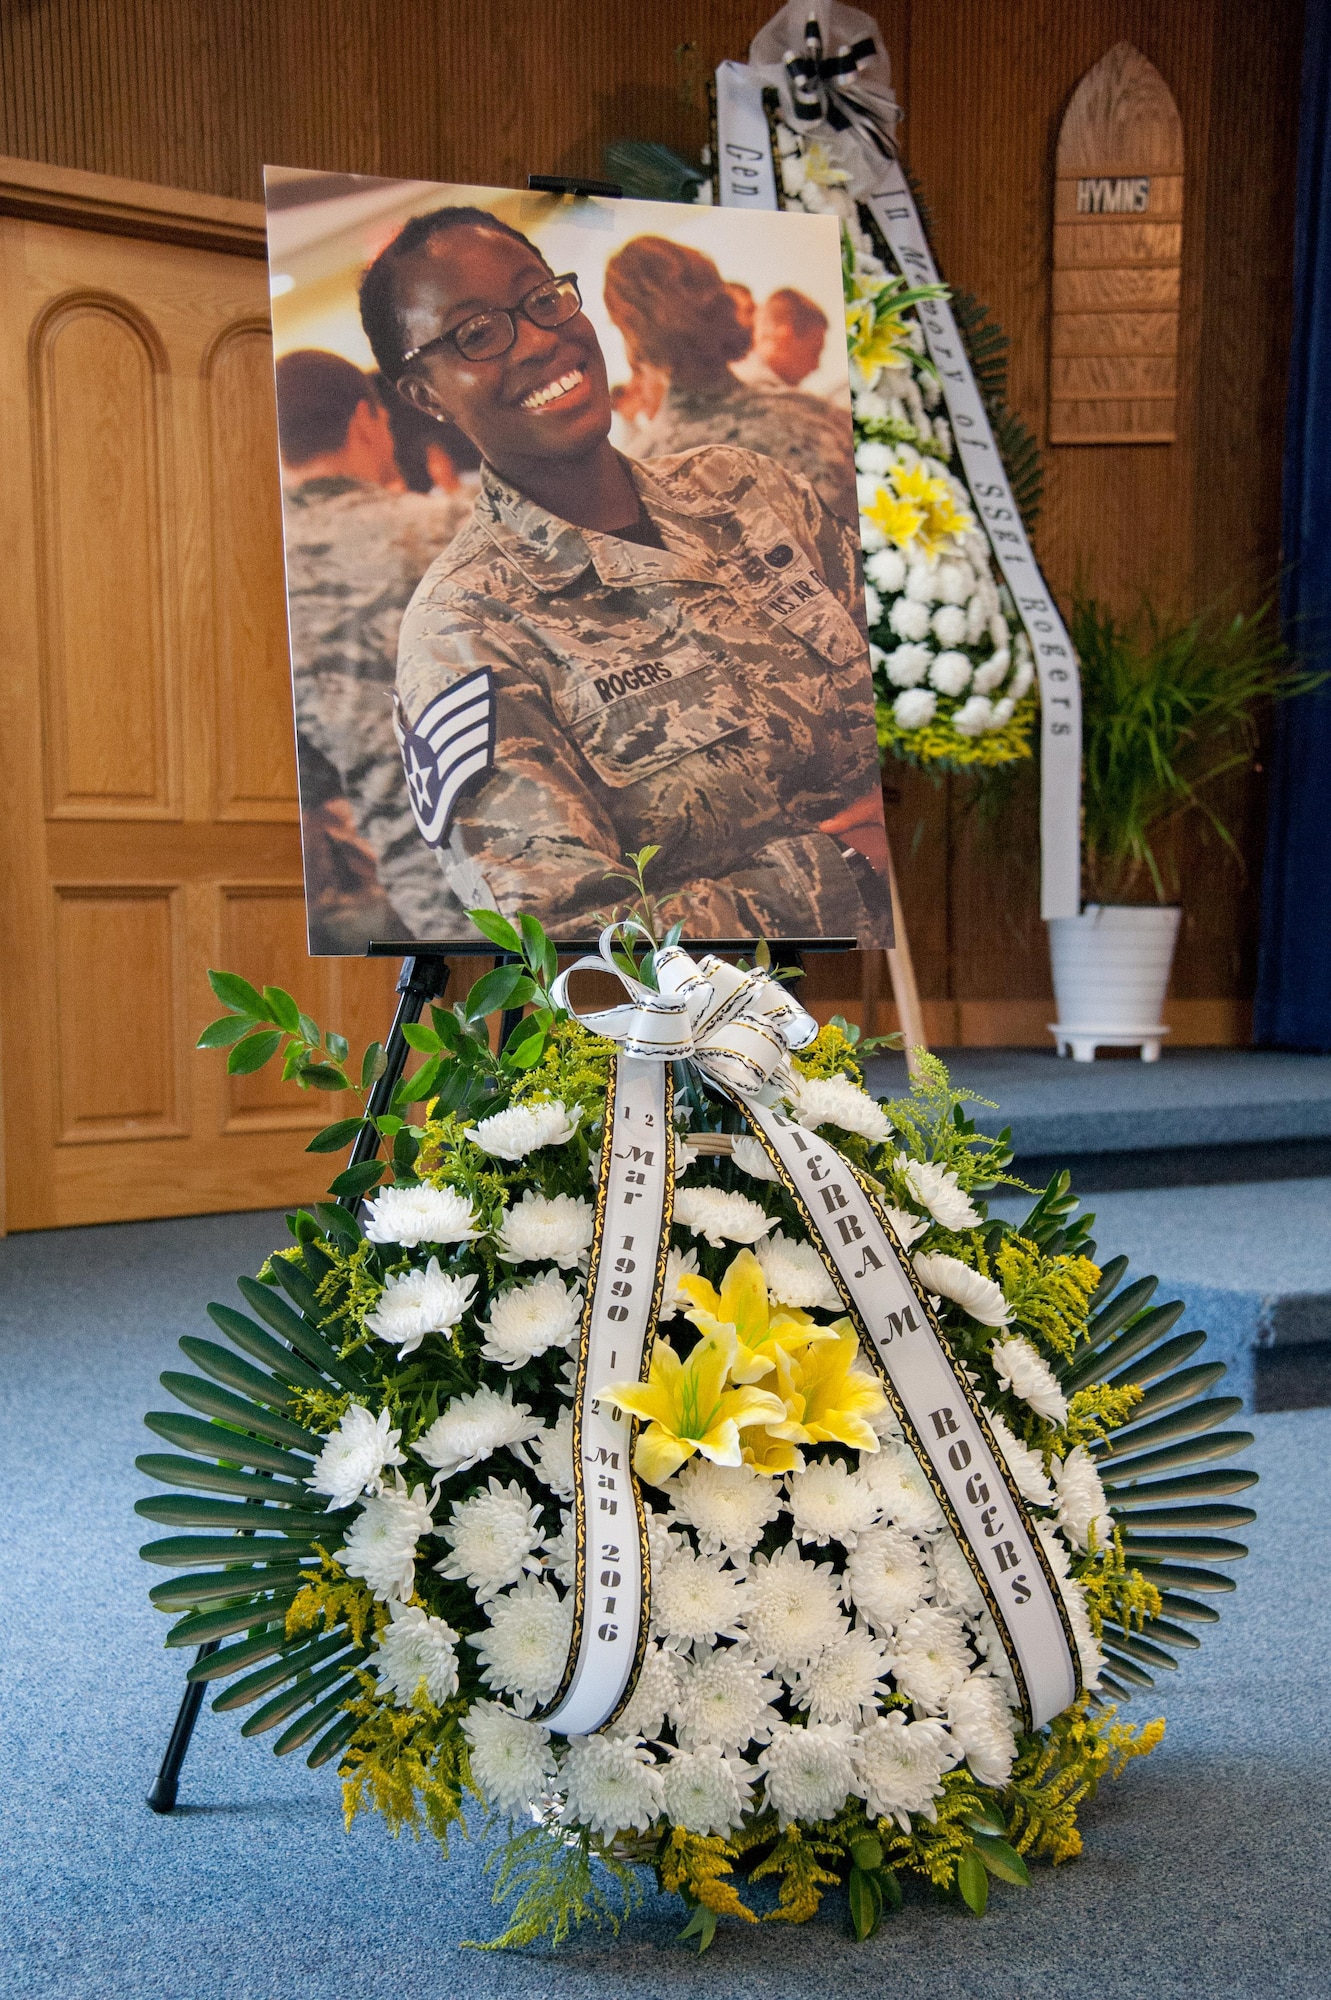 A photo of Staff Sgt. Cierra Rogers and wreath sit at the front of the base chapel during her memorial service at Osan Air Base, Republic of Korea, June 24, 2016.  Military and civilian members of the Osan and Pyeongtaek community gathered alongside the Rogers family to honor Sergeant Rogers, a 731st Air Mobility Squadron Airman, who died May 20. (U.S. Air Force photo by Staff Sgt. Jonathan Steffen)